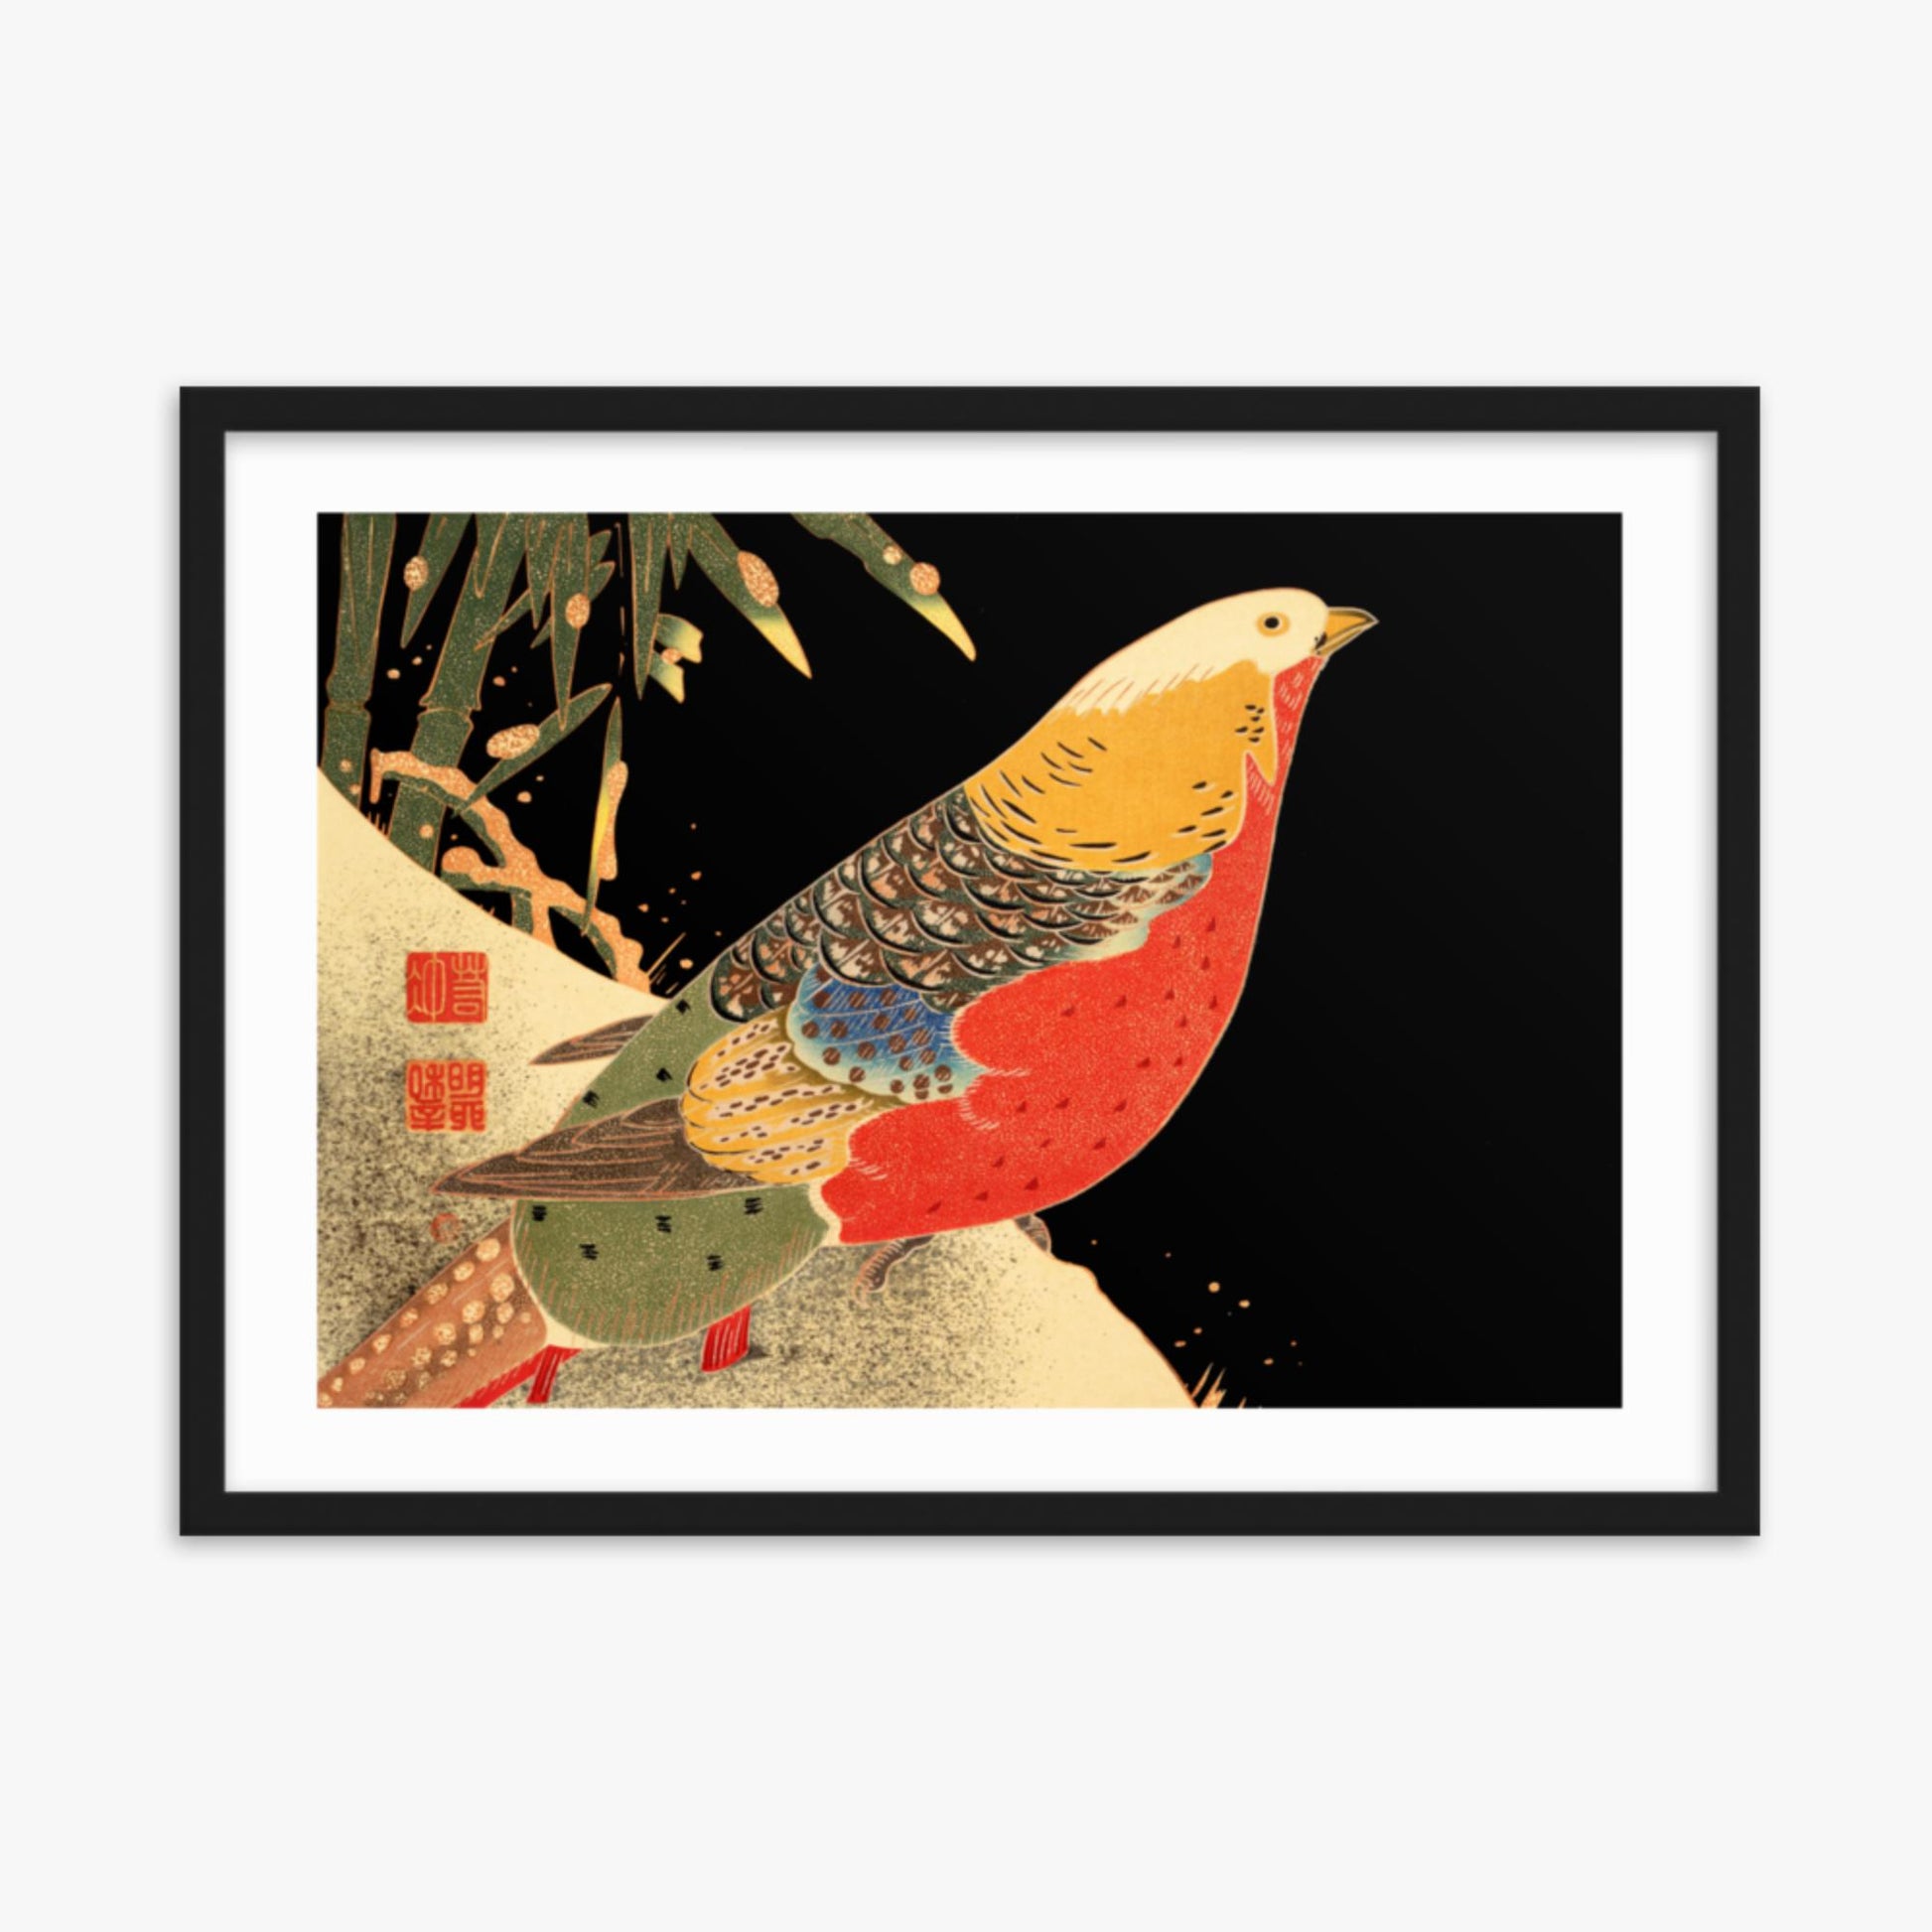 Ito Jakuchu - Golden Pheasant in the Snow 50x70 cm Poster With Black Frame